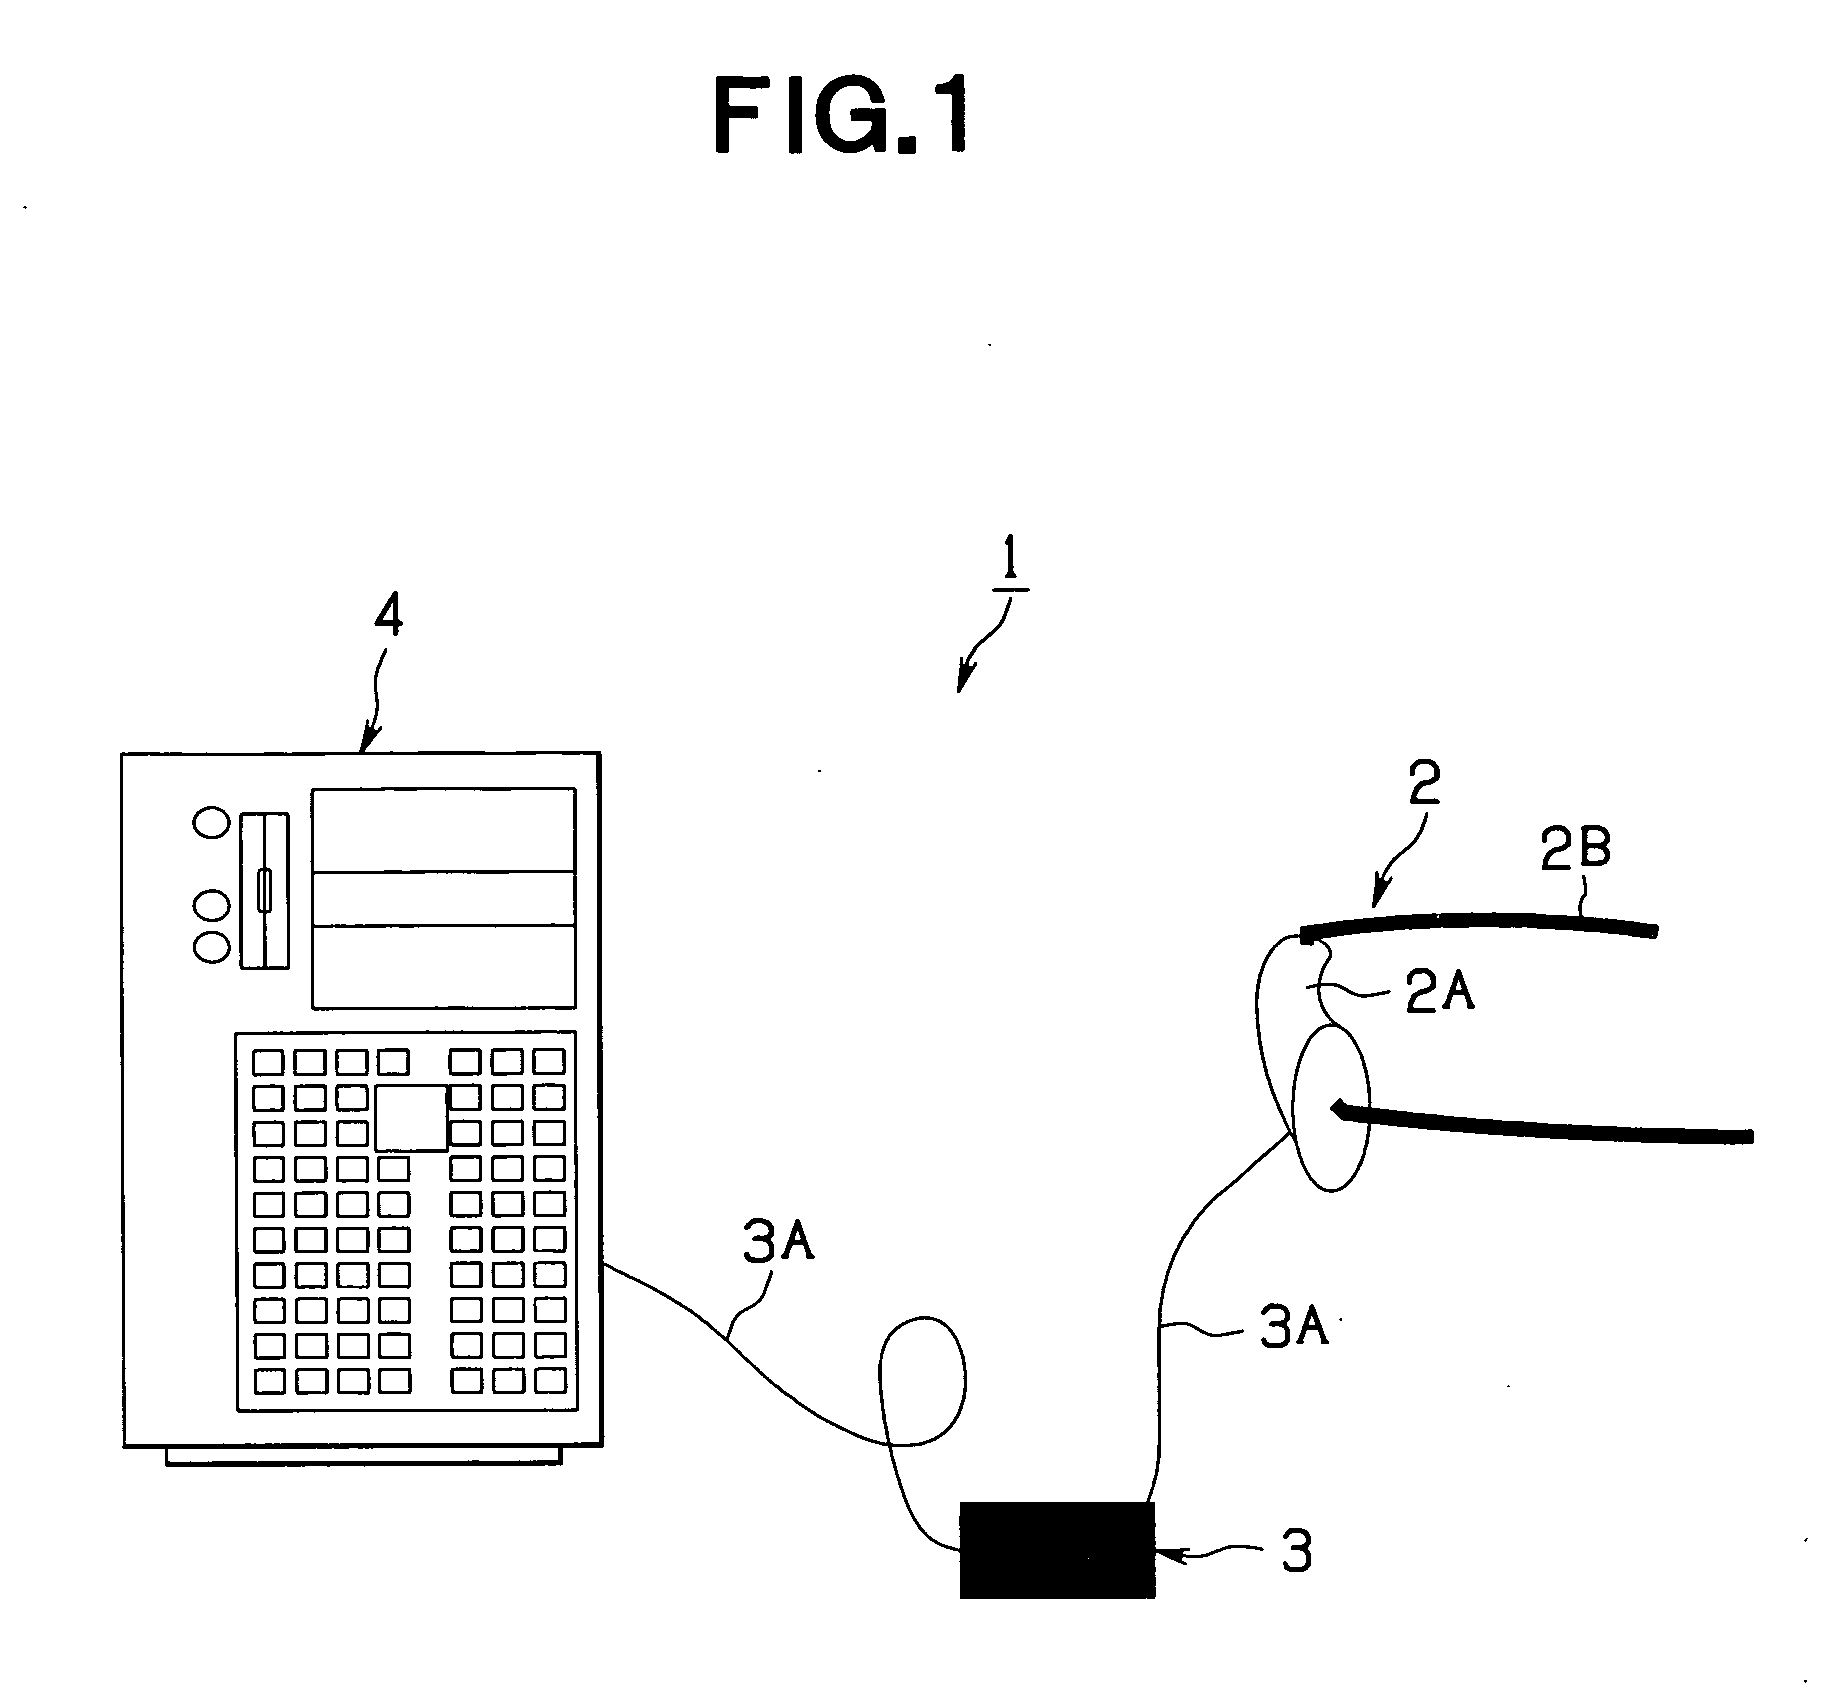 Head-mounted display system and method for processing images